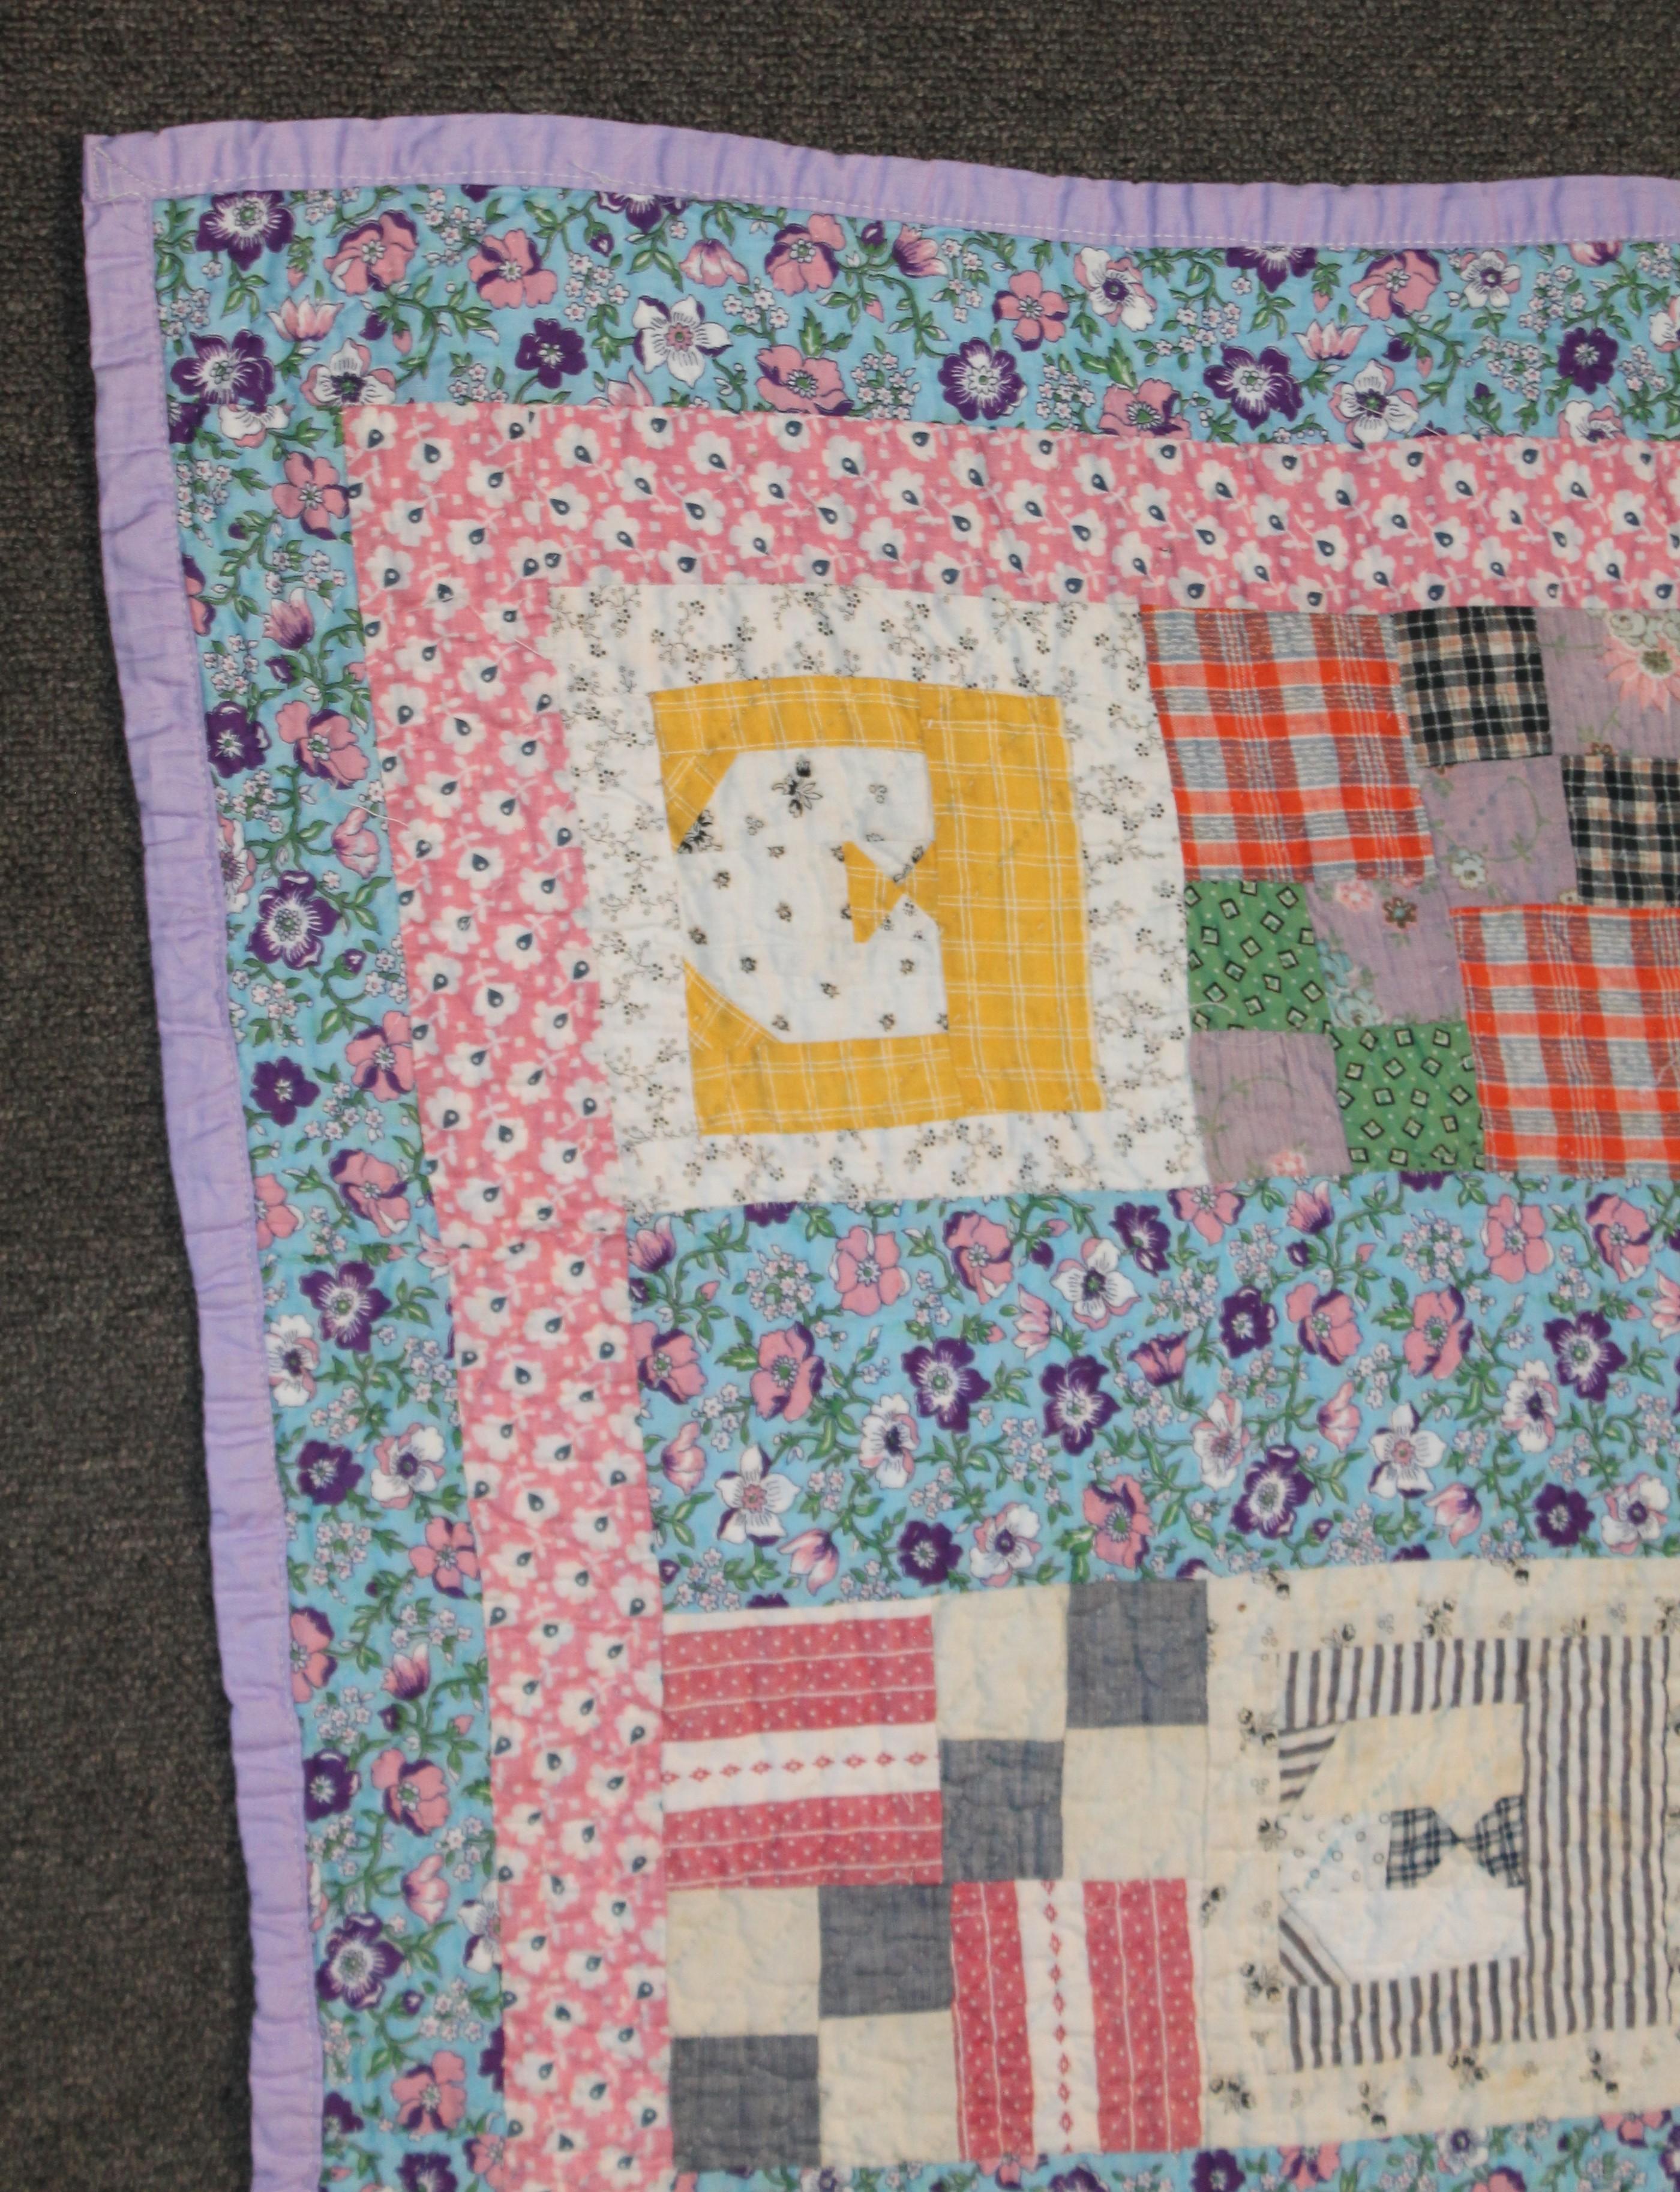 This folky hand sewn and pieced quilt is from the 1920s and has the letter E is sewn in. The folky fabric is funky and different prints and calicos. The quilt is in very good condition.